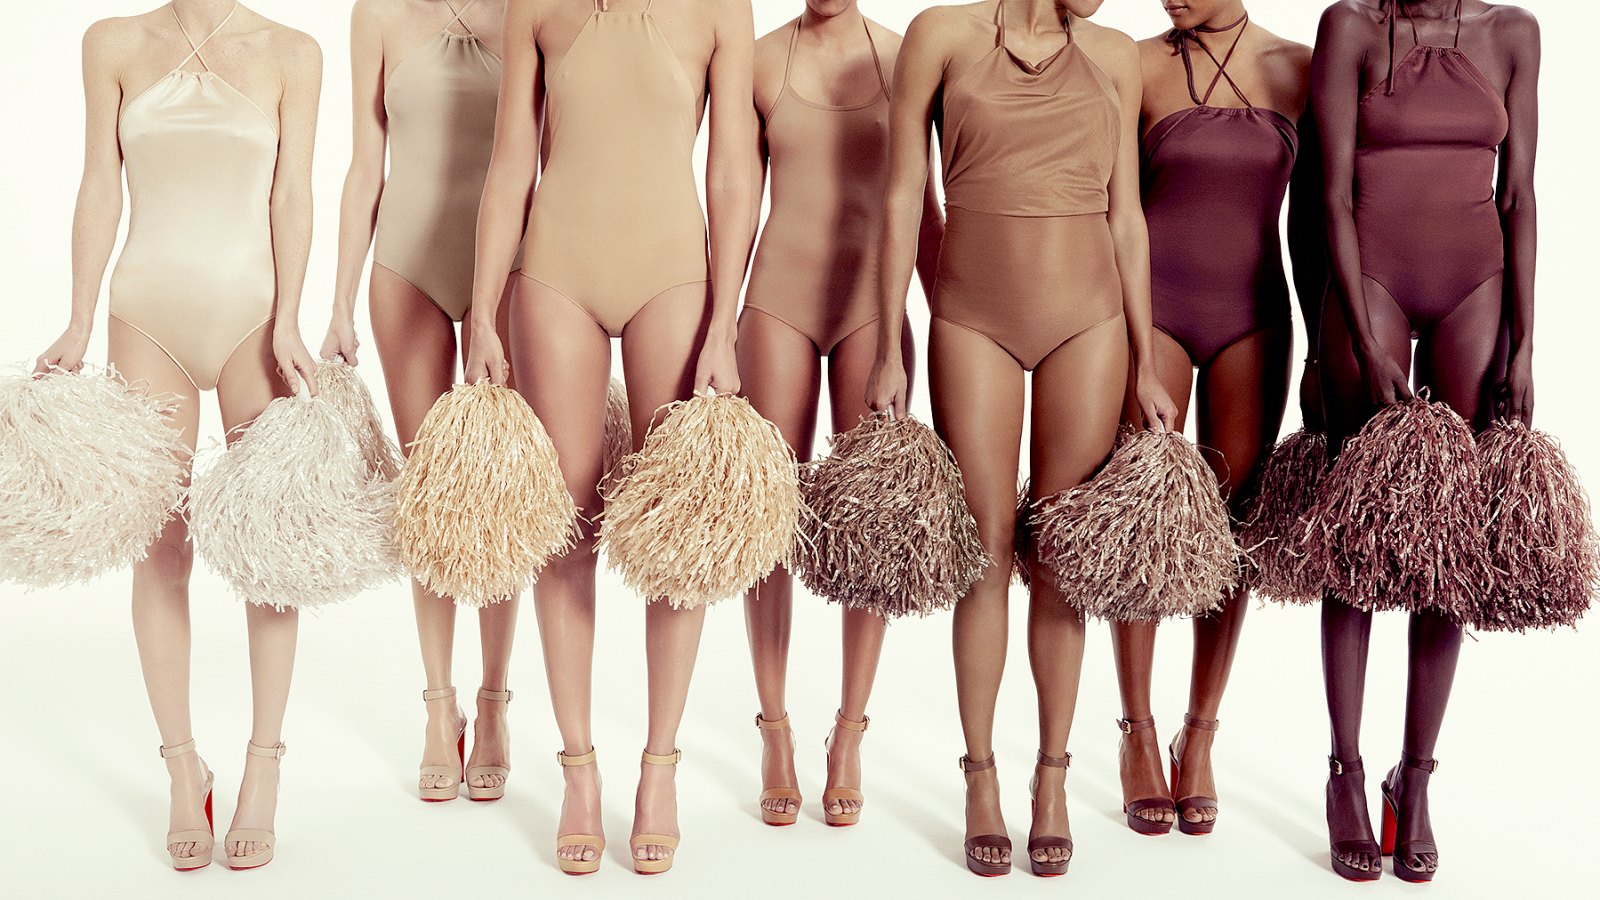 Christian Louboutin's Nudes Collection